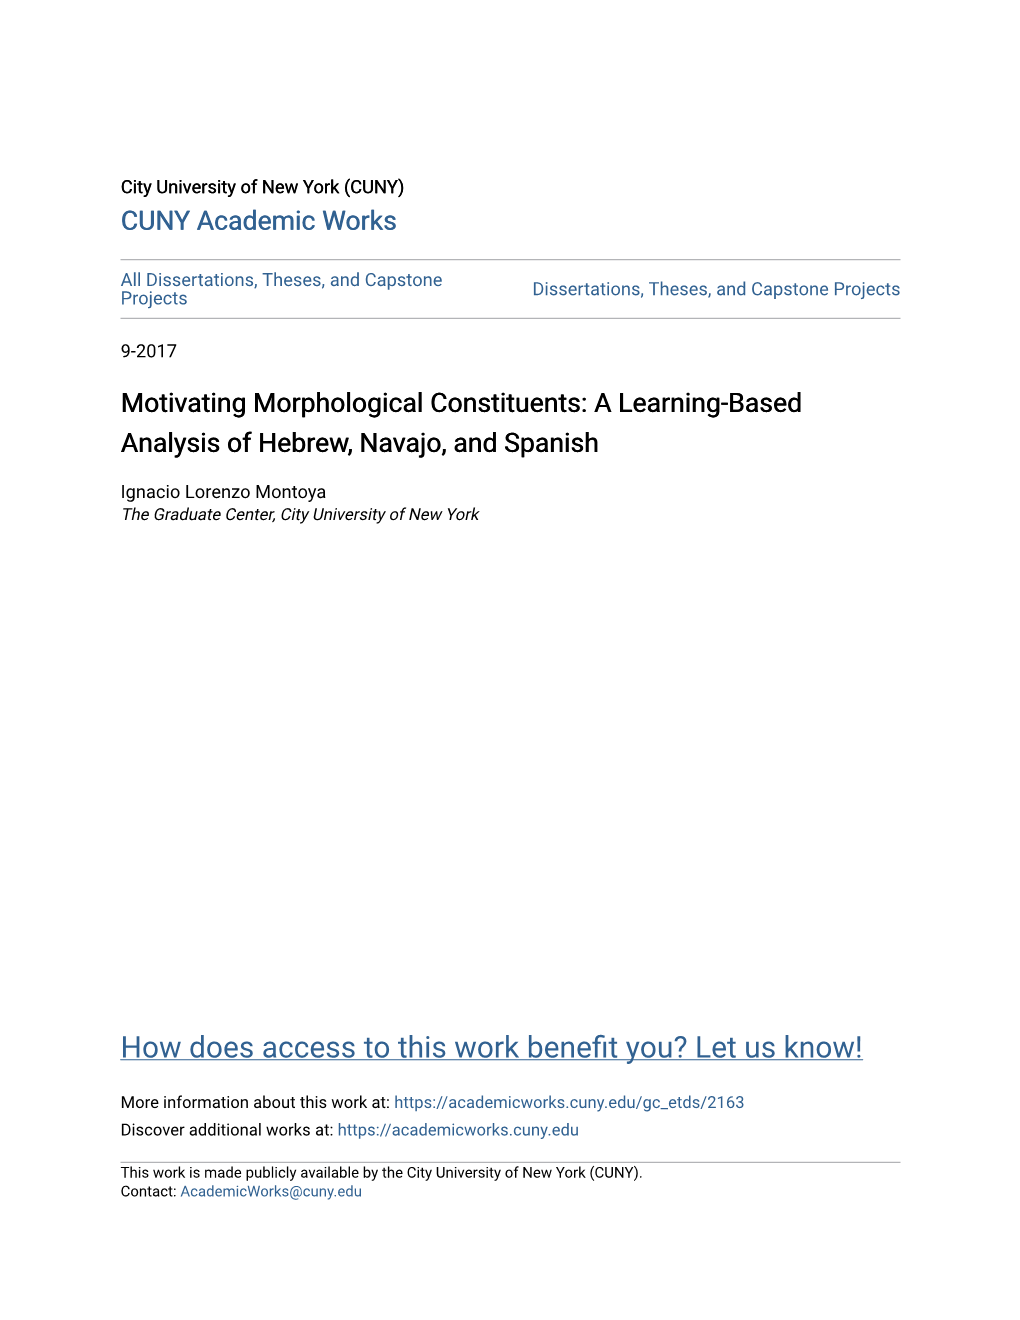 Motivating Morphological Constituents: a Learning-Based Analysis of Hebrew, Navajo, and Spanish